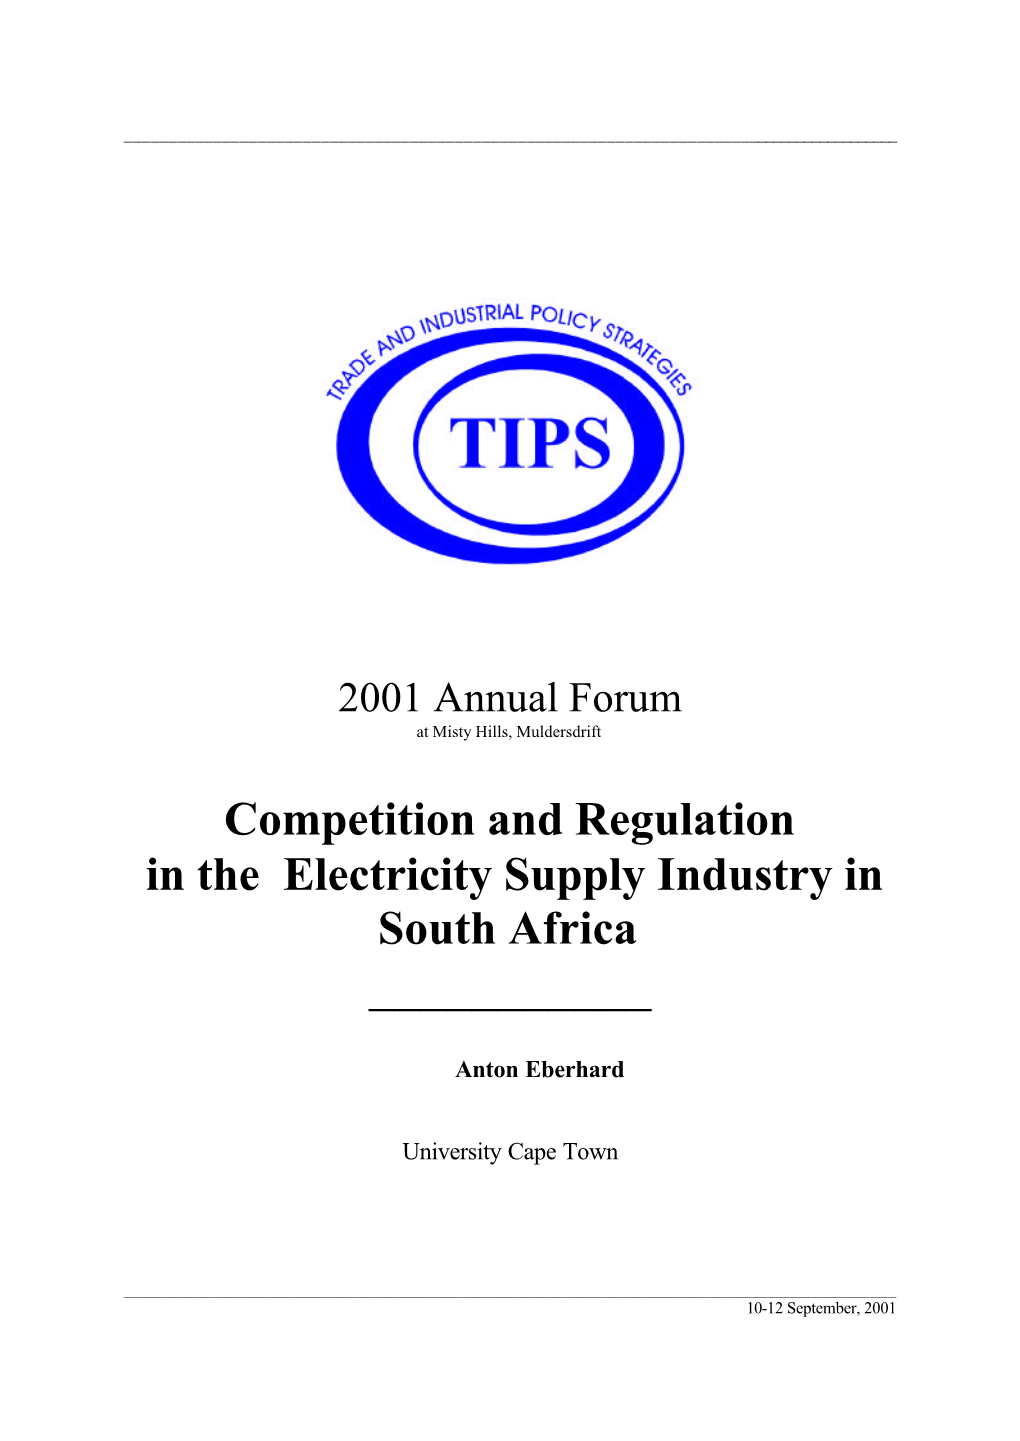 Competition and Regulation in the Electricity Supply Industry in South Africa